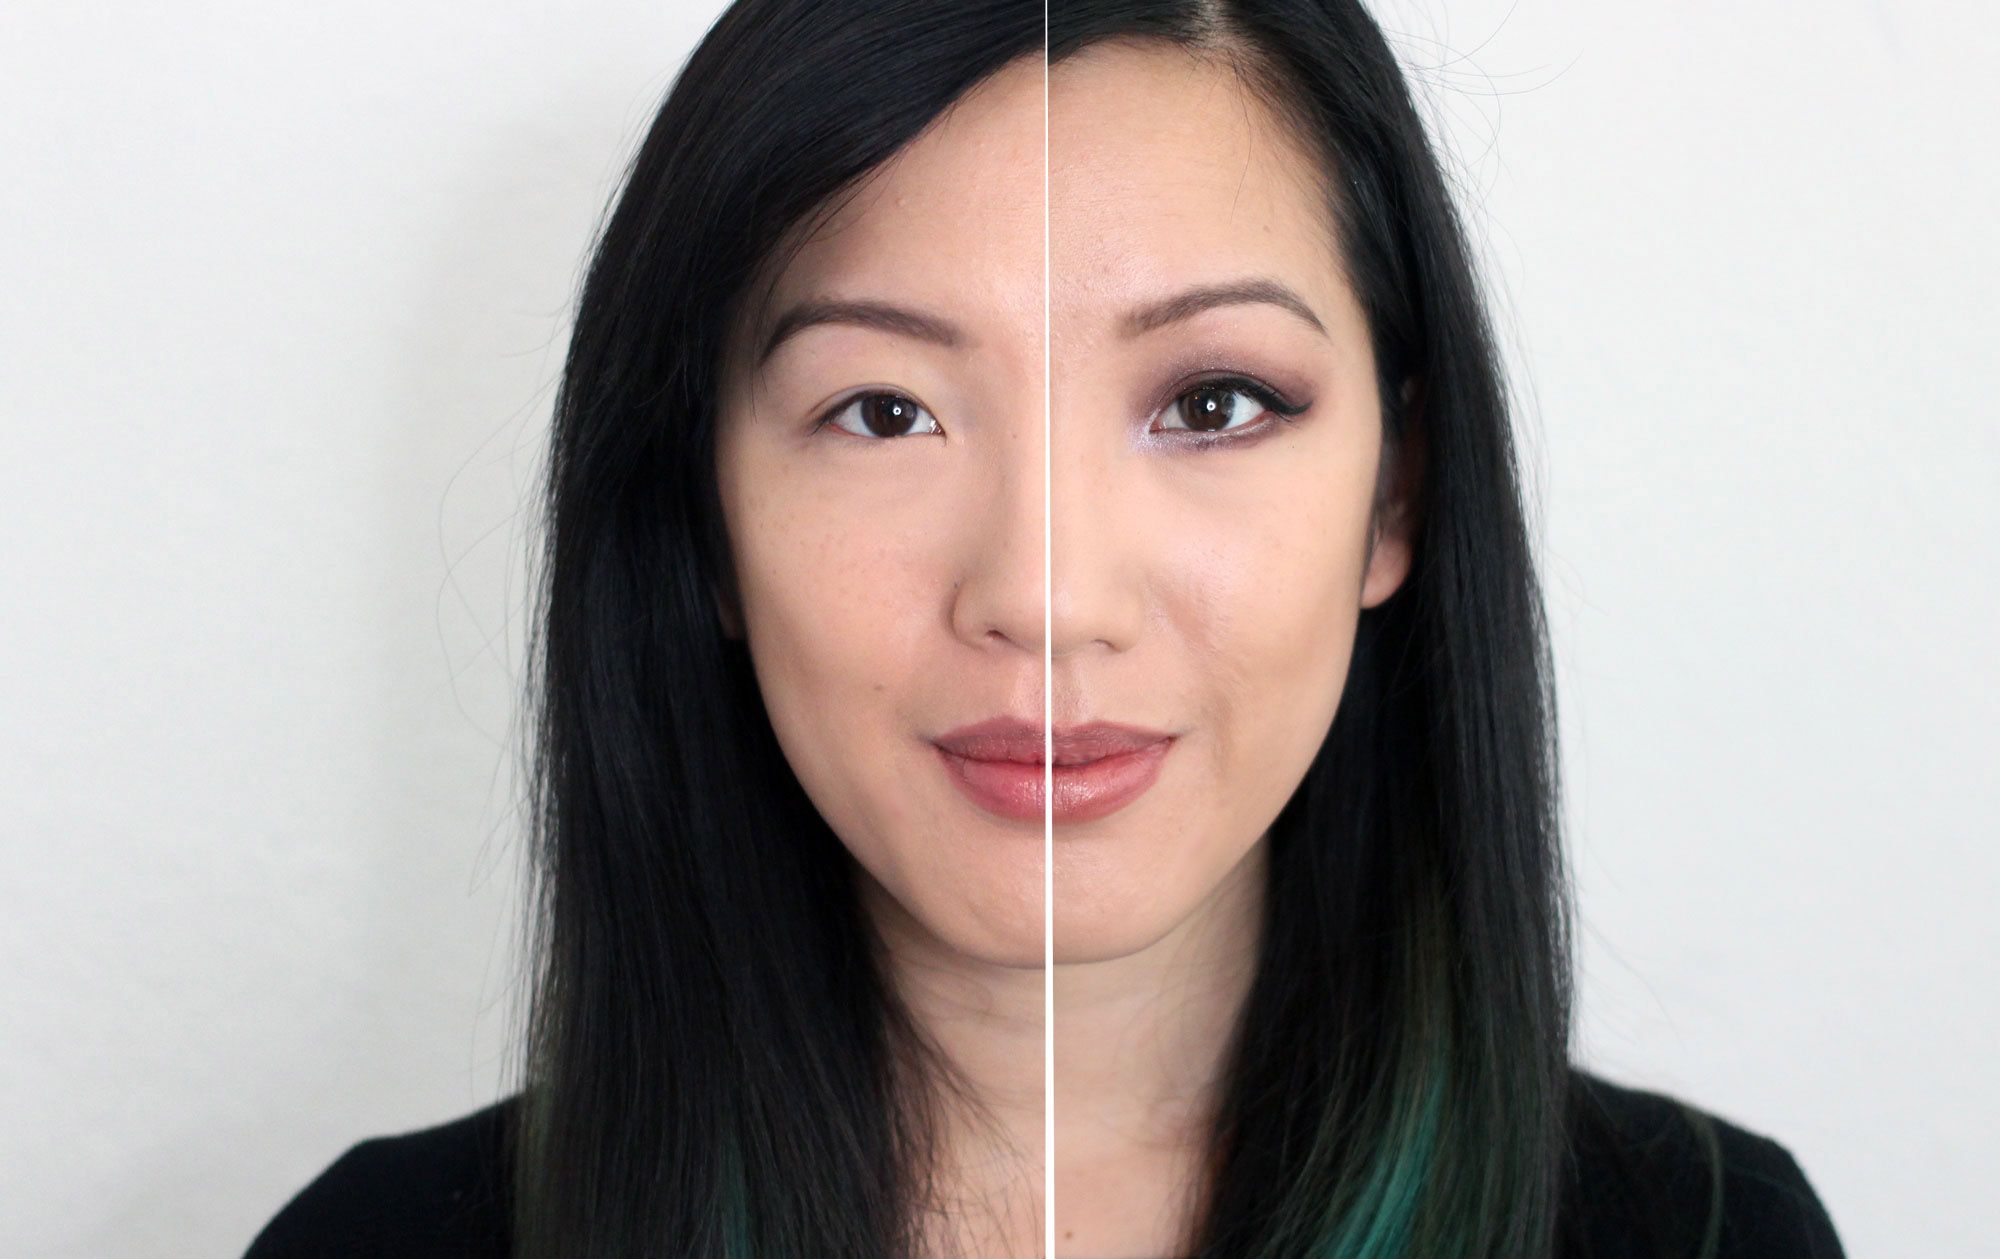 Makeup For Small Eyes Make Small Eyes Look Bigger With These Makeup Tricks